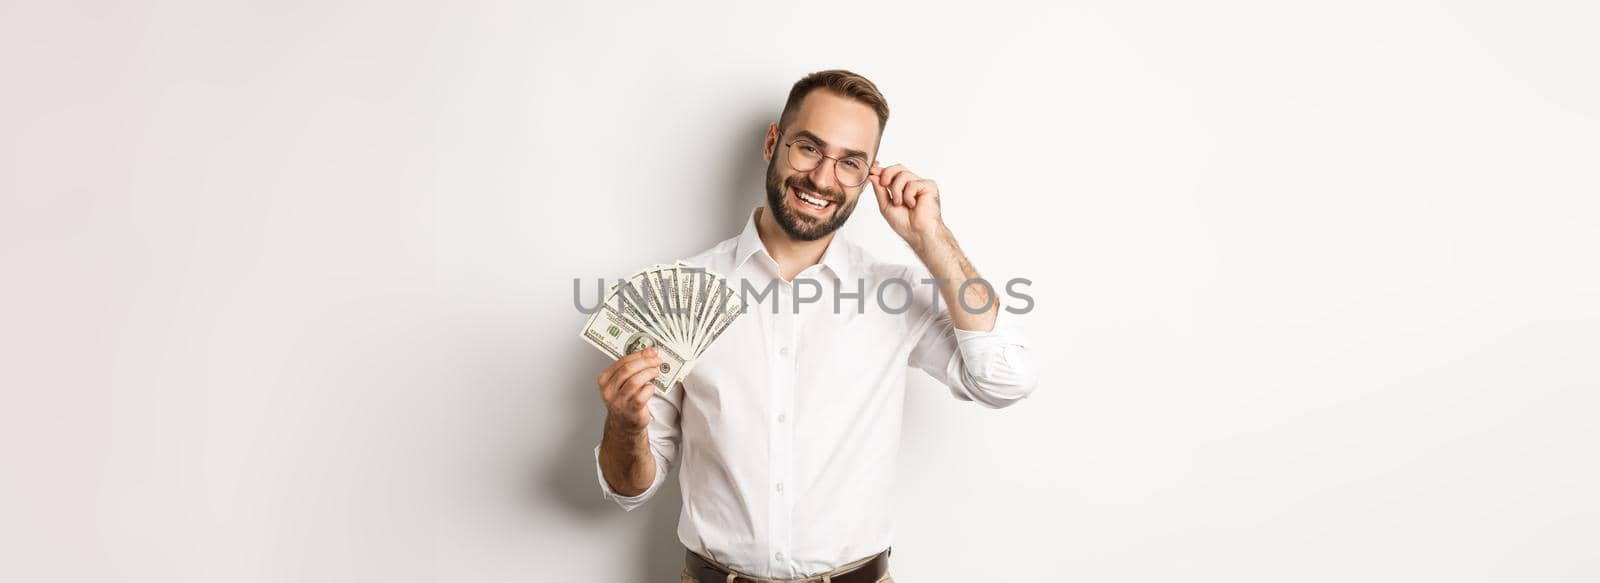 Handsome successful businessman holding money, fixing glasses on nose, standing over white background.